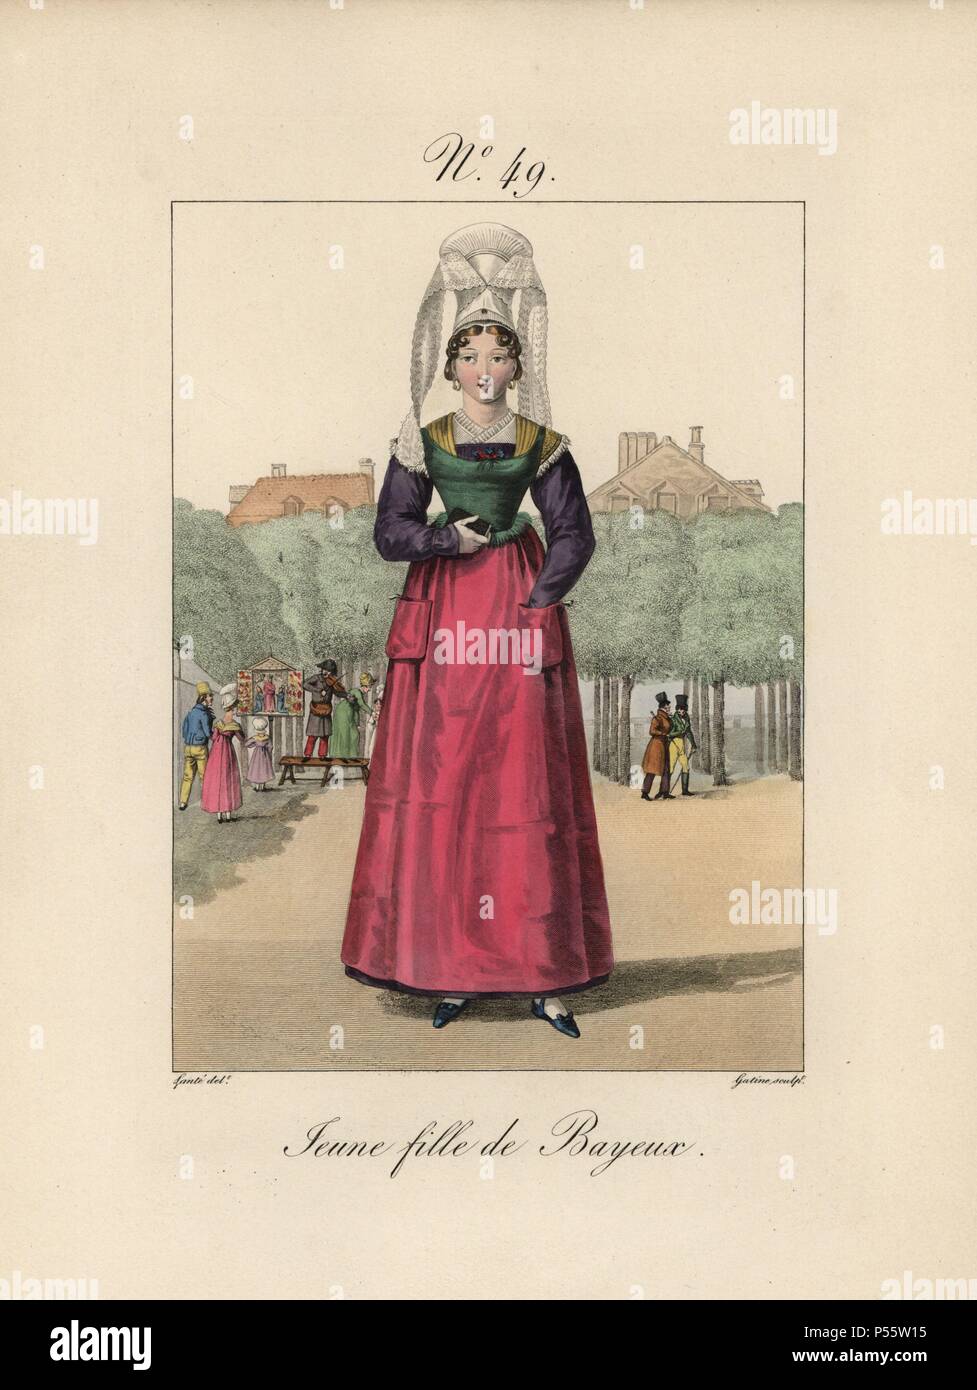 Young woman of Bayeux. Many things here to note: the wide parting in the hair, the angles of the tails, the green bib over the pink apron. The background shows the main promenade in town, with a family watching a violinist. Hand-colored fashion plate illustration by Benoit Pecheux engraved by Gatine from Louis-Marie Lante's 'Costumes des femmes du Pays de Caux,' 1827/1885. With their tall Alsation lace hats, the women of Caux and Normandy were famous for the elegance and style. Stock Photo